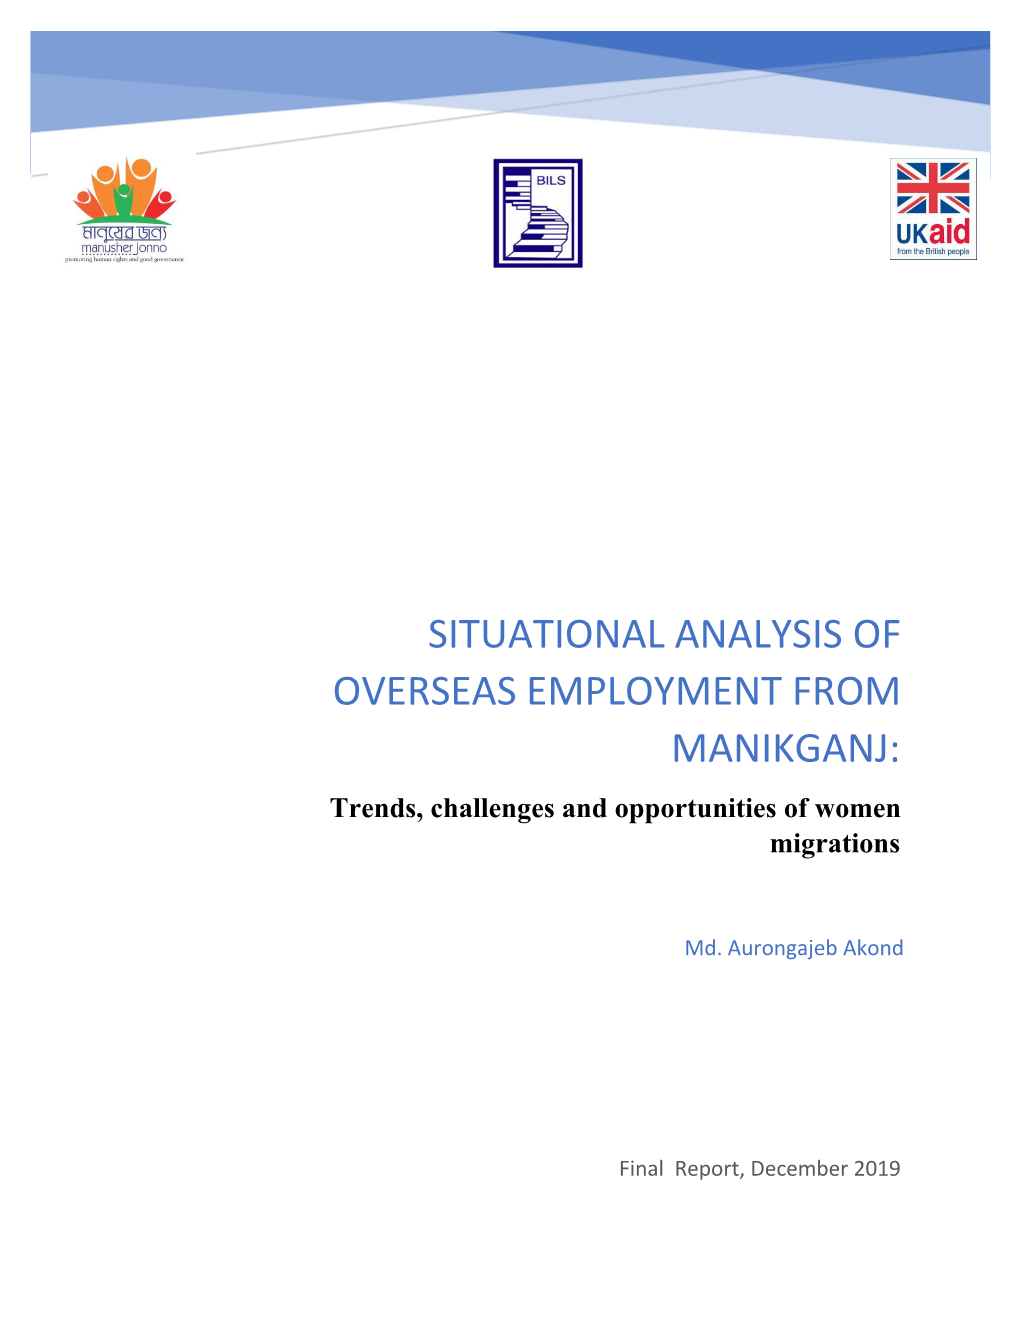 SITUATIONAL ANALYSIS of OVERSEAS EMPLOYMENT from MANIKGANJ: Trends, Challenges and Opportunities of Women Migrations